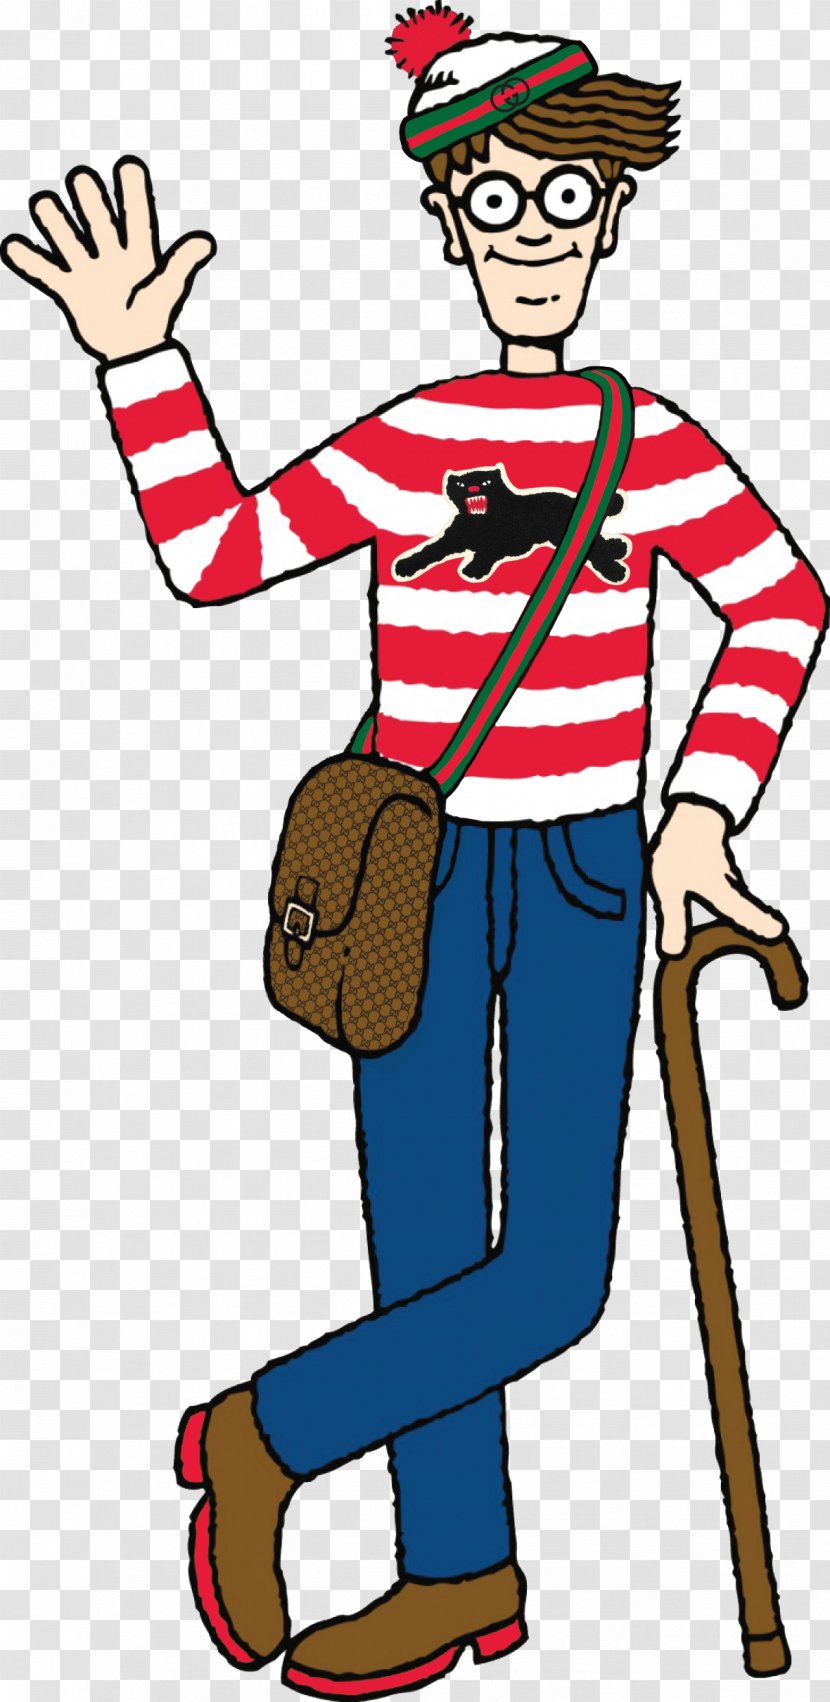 Where's Wally? Children's Literature Walker Books Odlaw - Boy - Gucci Gang Transparent PNG